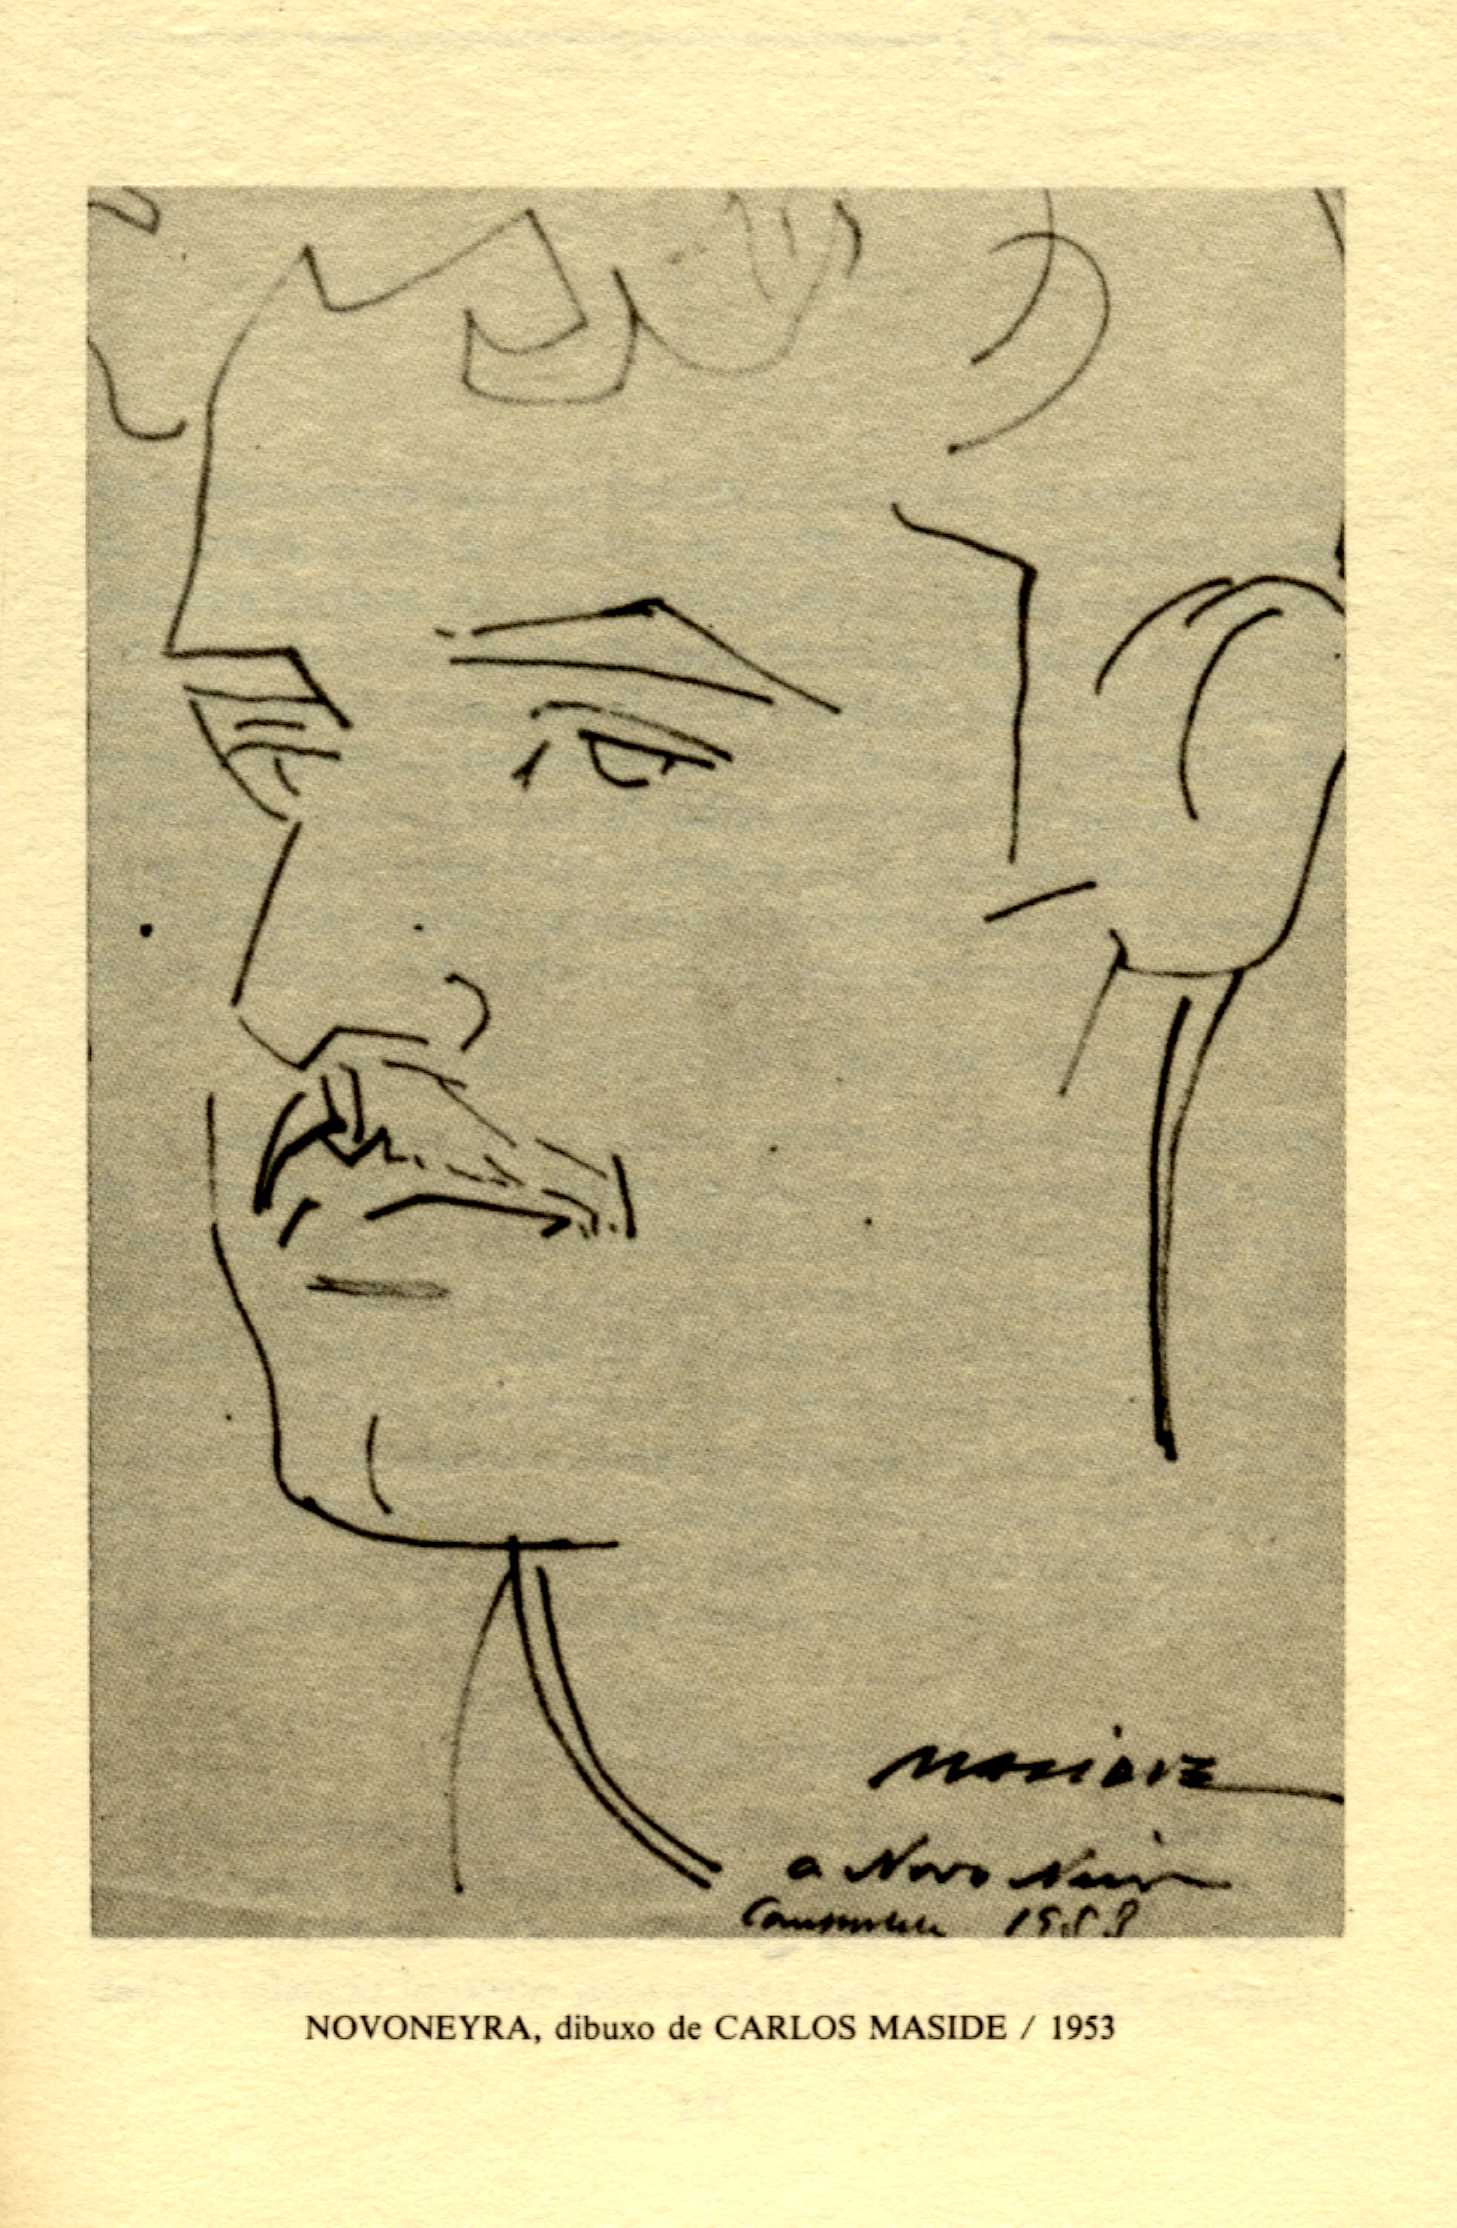 the drawing shows a man in profile, and his name is unknown